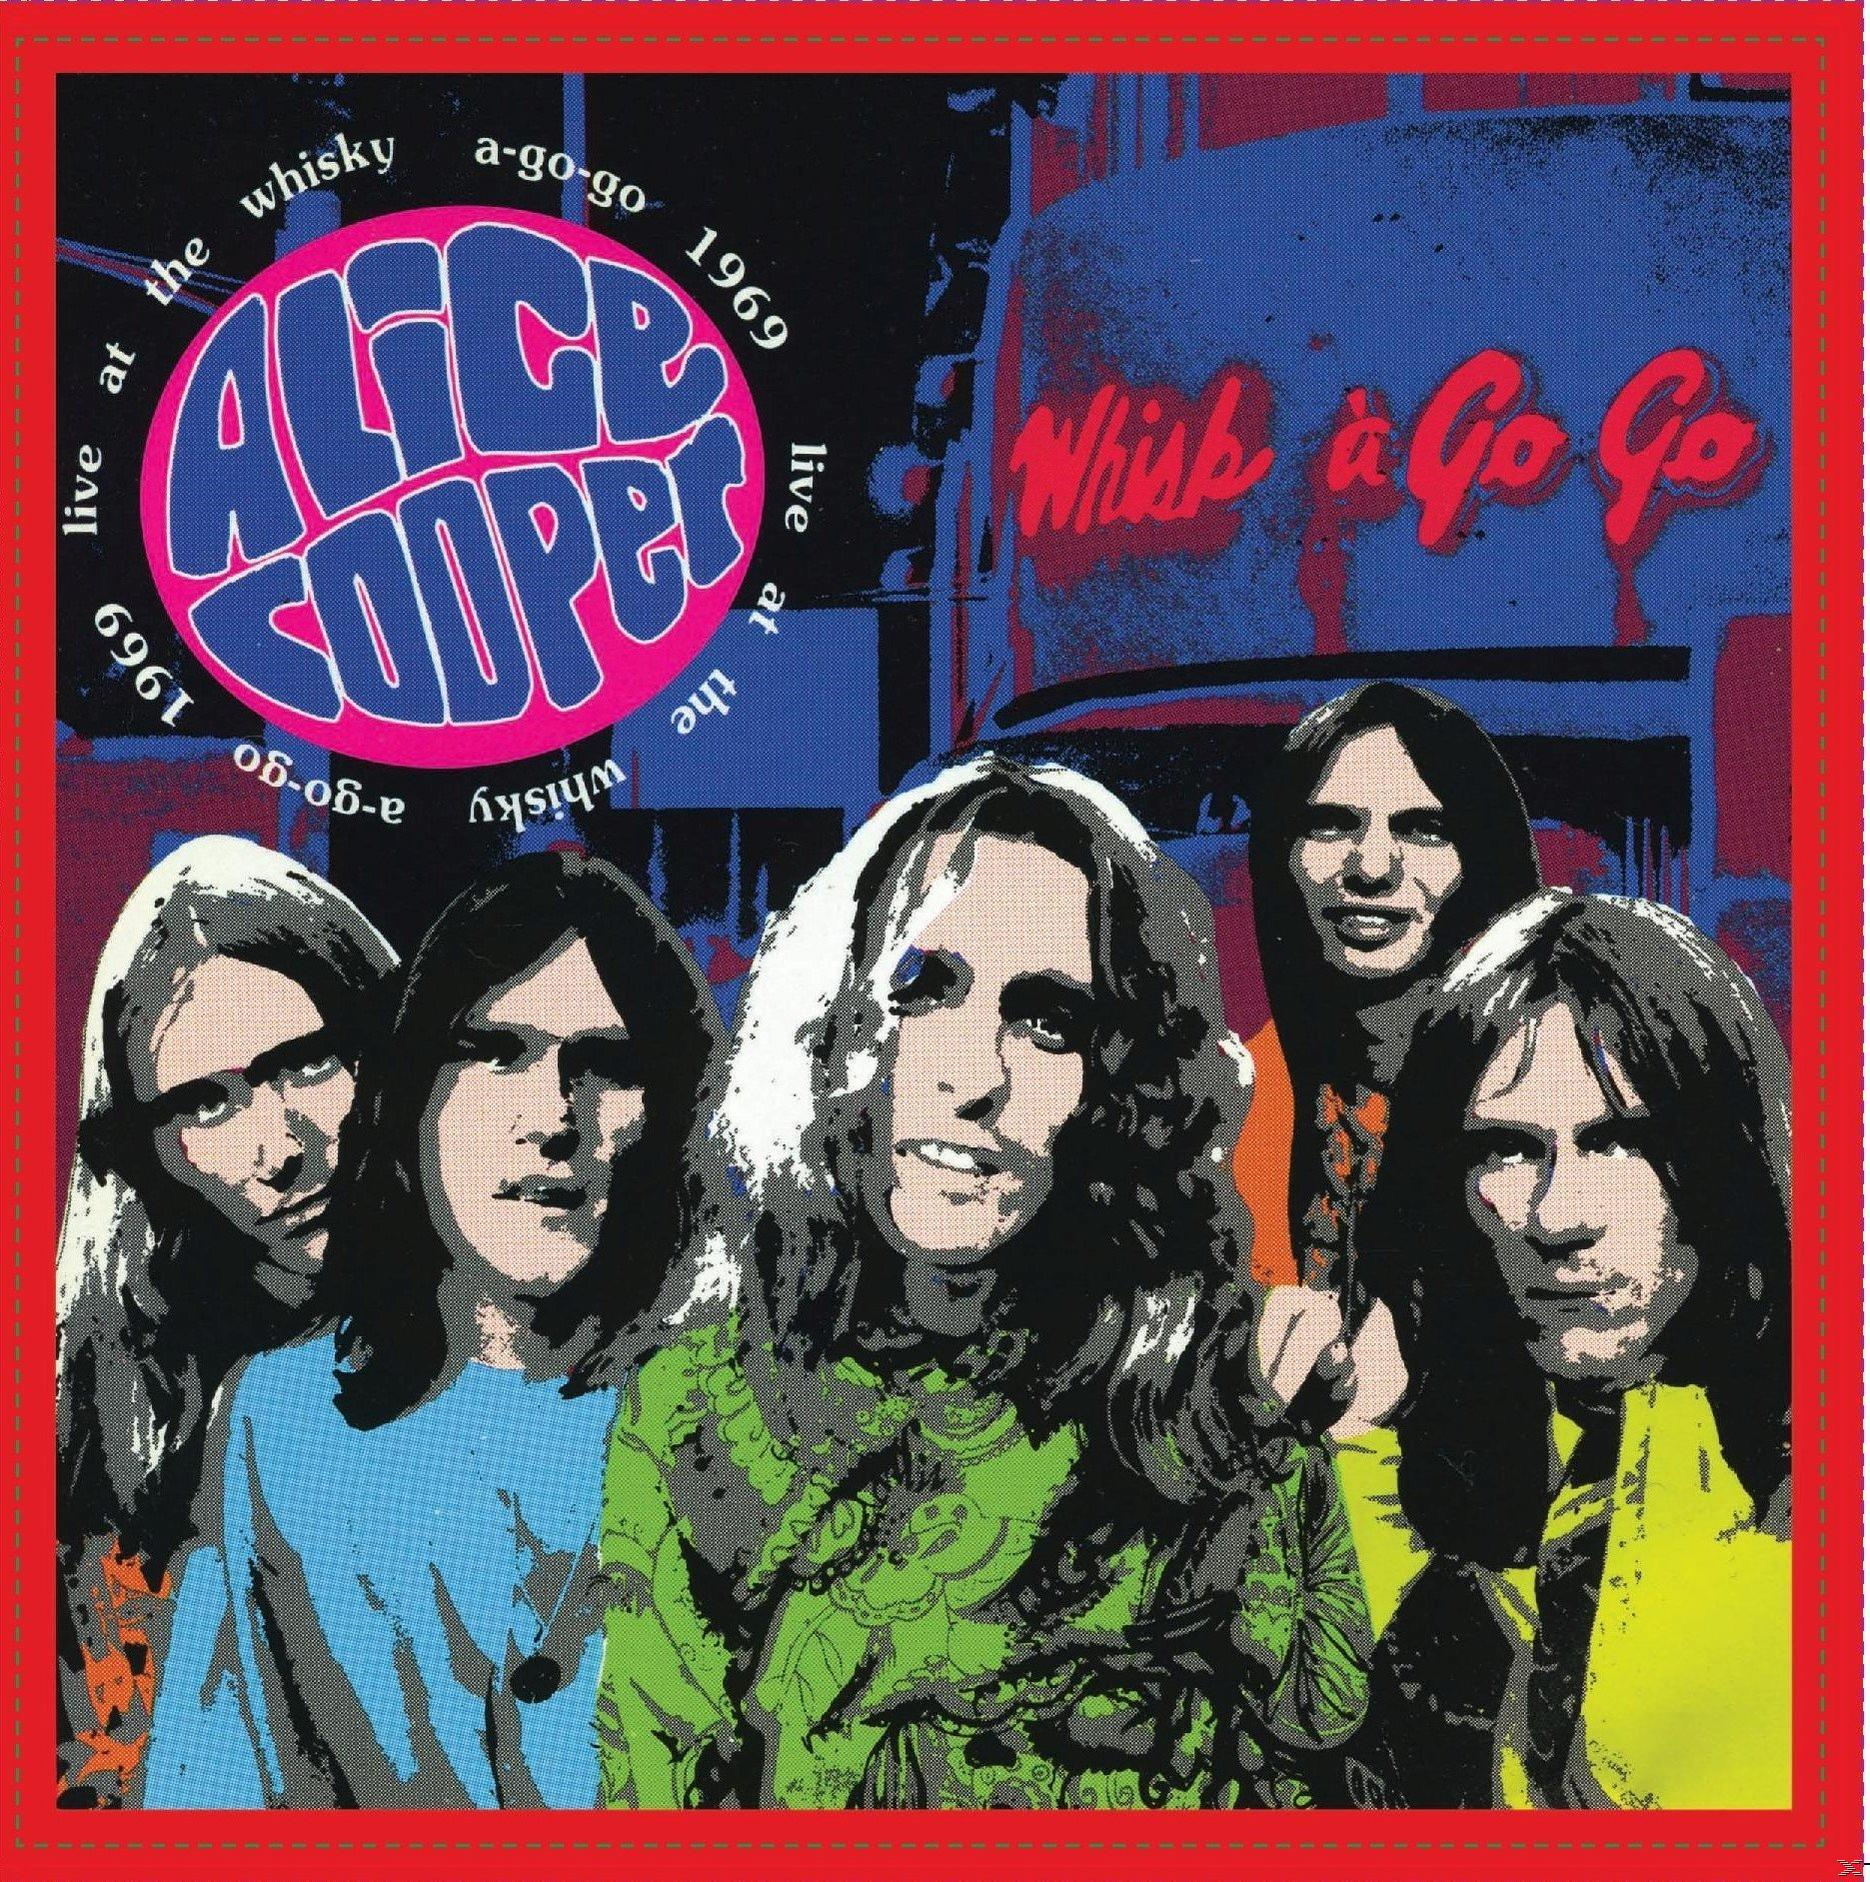 (Vinyl) Live - 1969 - A At Cooper Alice Go-Go, Whiskey The